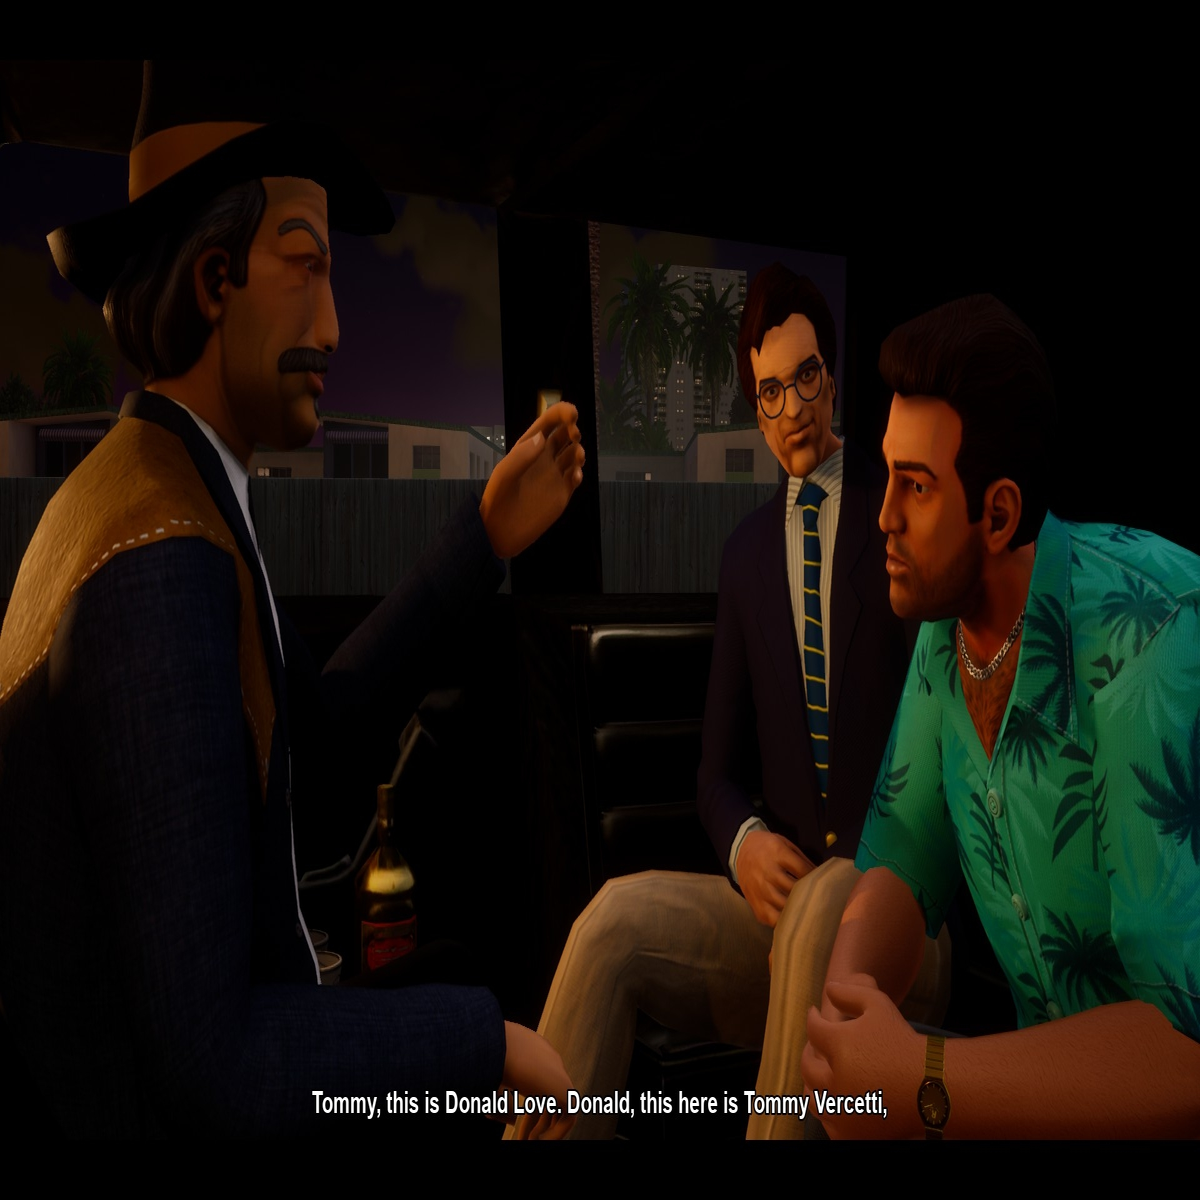 Grand Theft Auto: Vice City is best left as a hazy, enjoyable memory